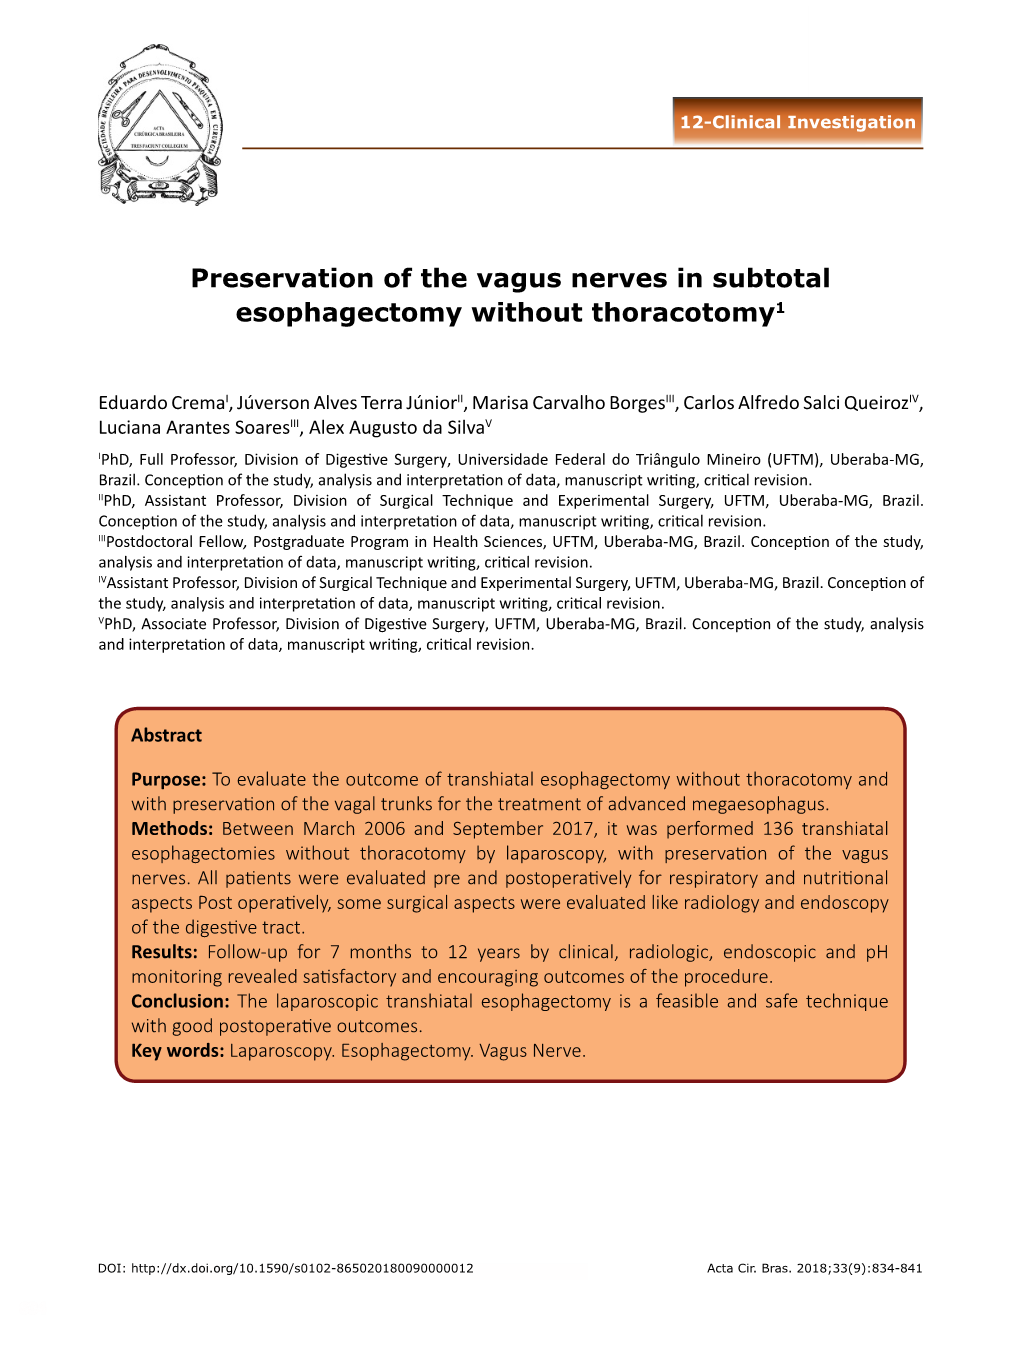 Preservation of the Vagus Nerves in Subtotal Esophagectomy Without Thoracotomy1